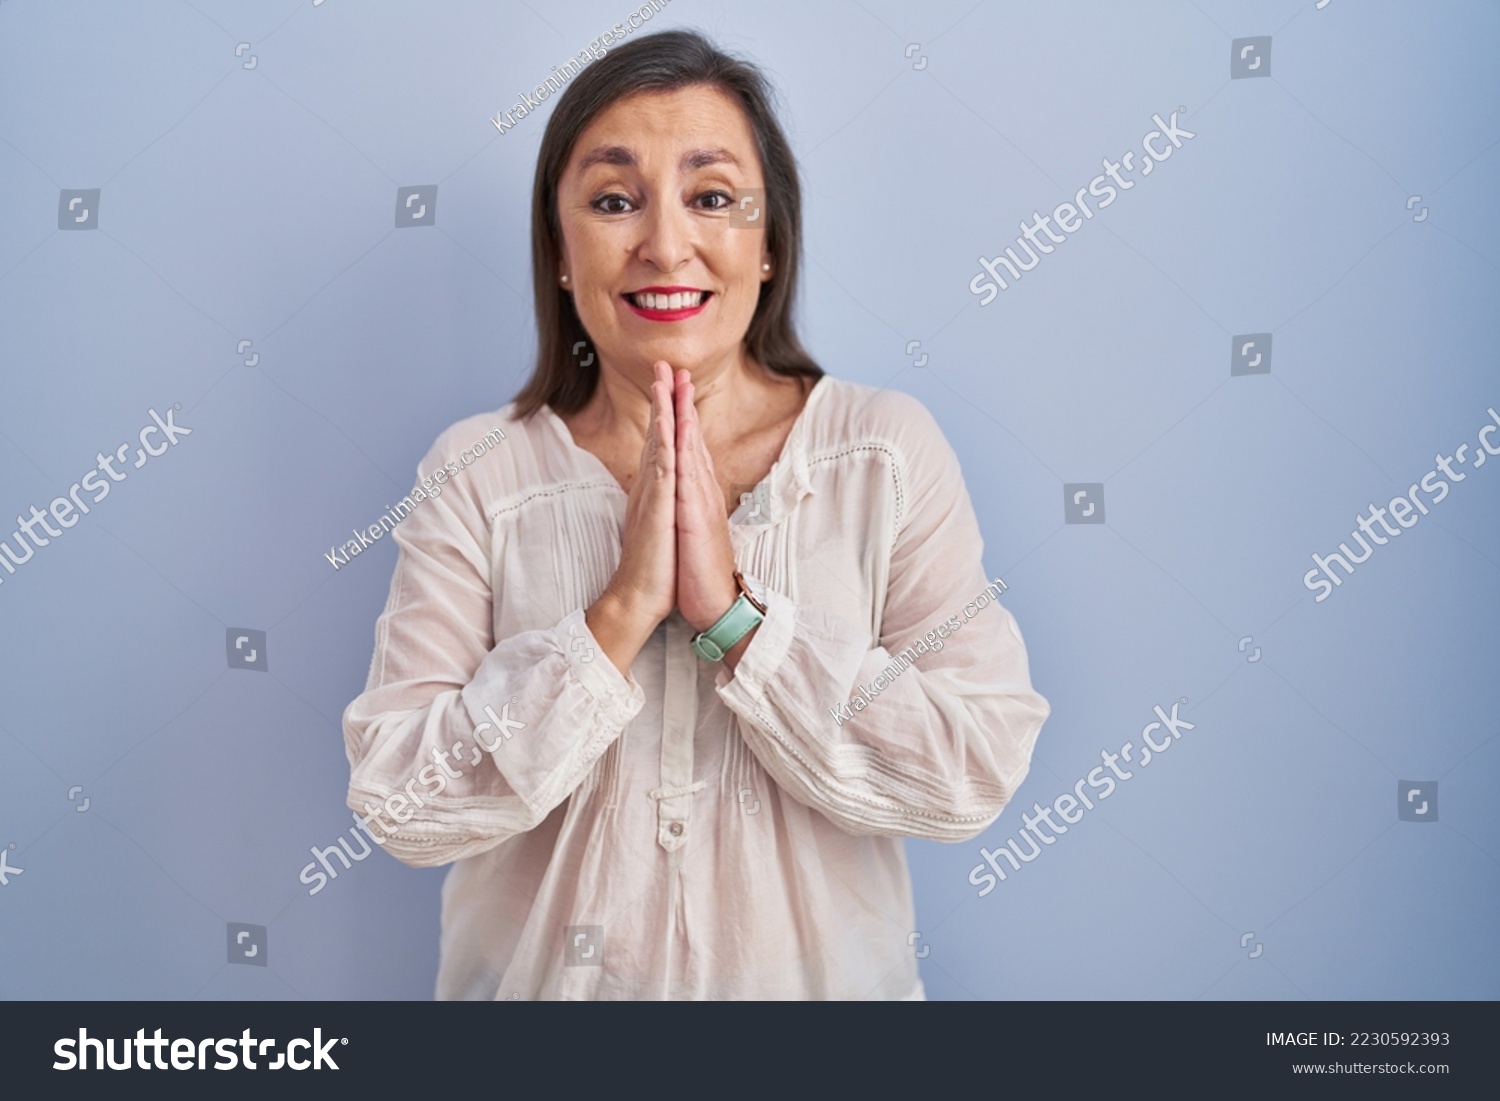 Middle age hispanic woman standing over blue background praying with hands together asking for forgiveness smiling confident.  #2230592393